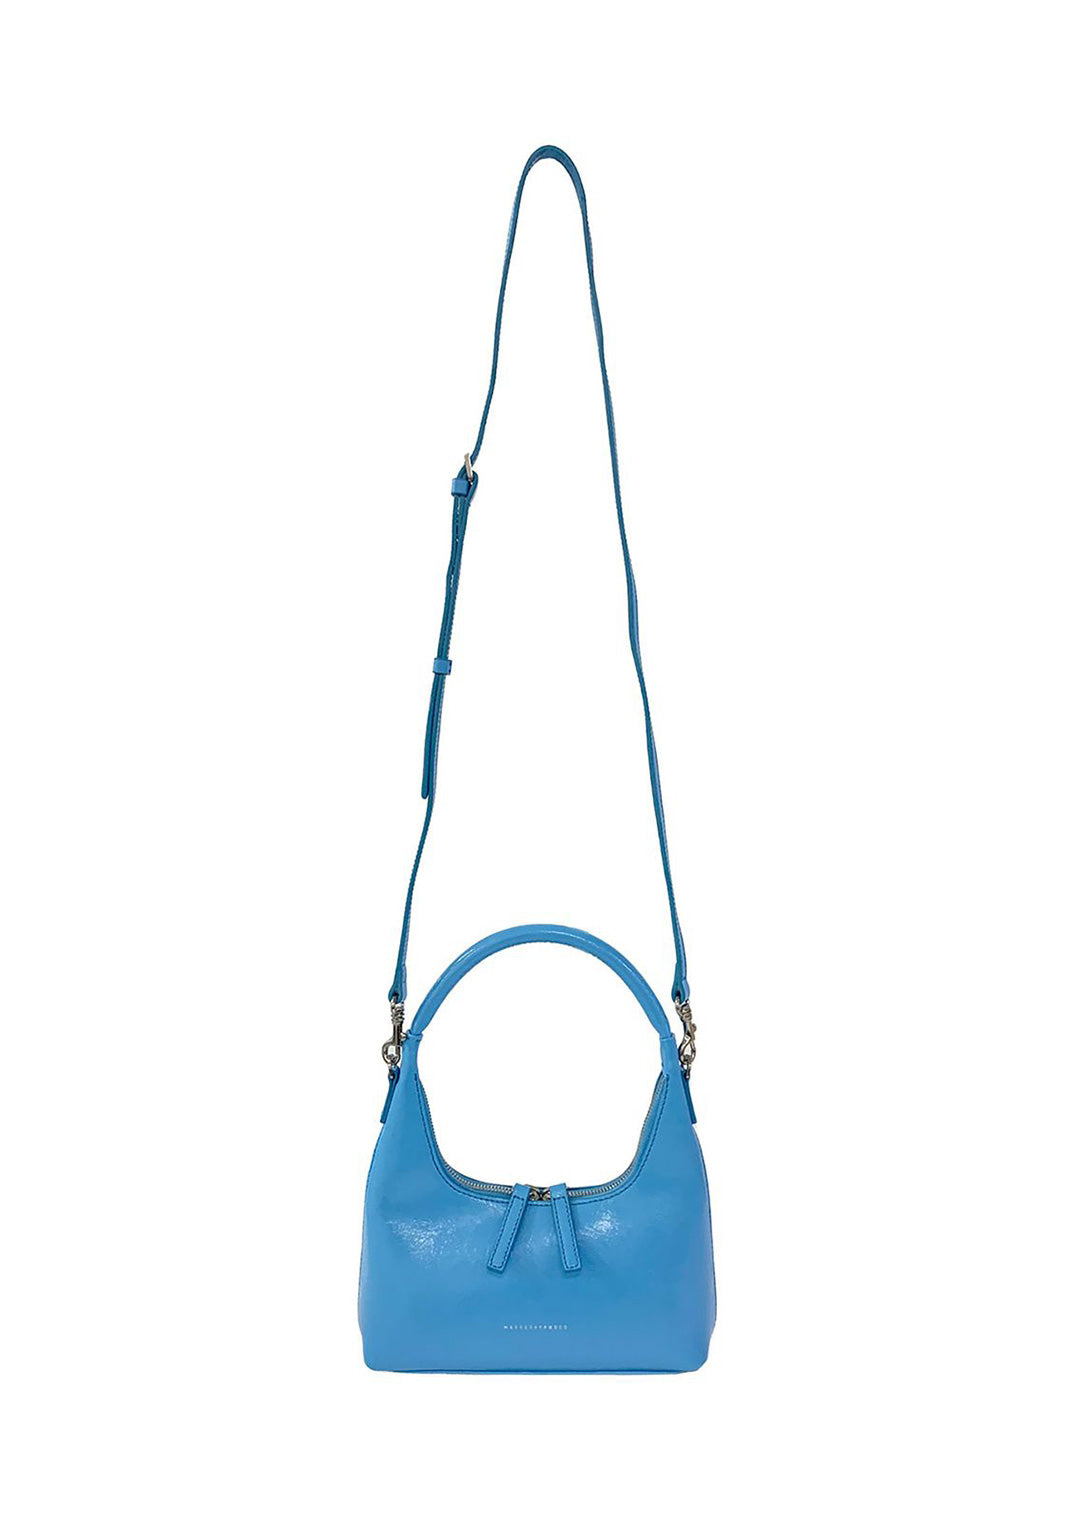 Marge Sherwood Mini Strap Leather Hobo - The WiC Project - Faith, Product  Reviews, Recipes, Giveaways